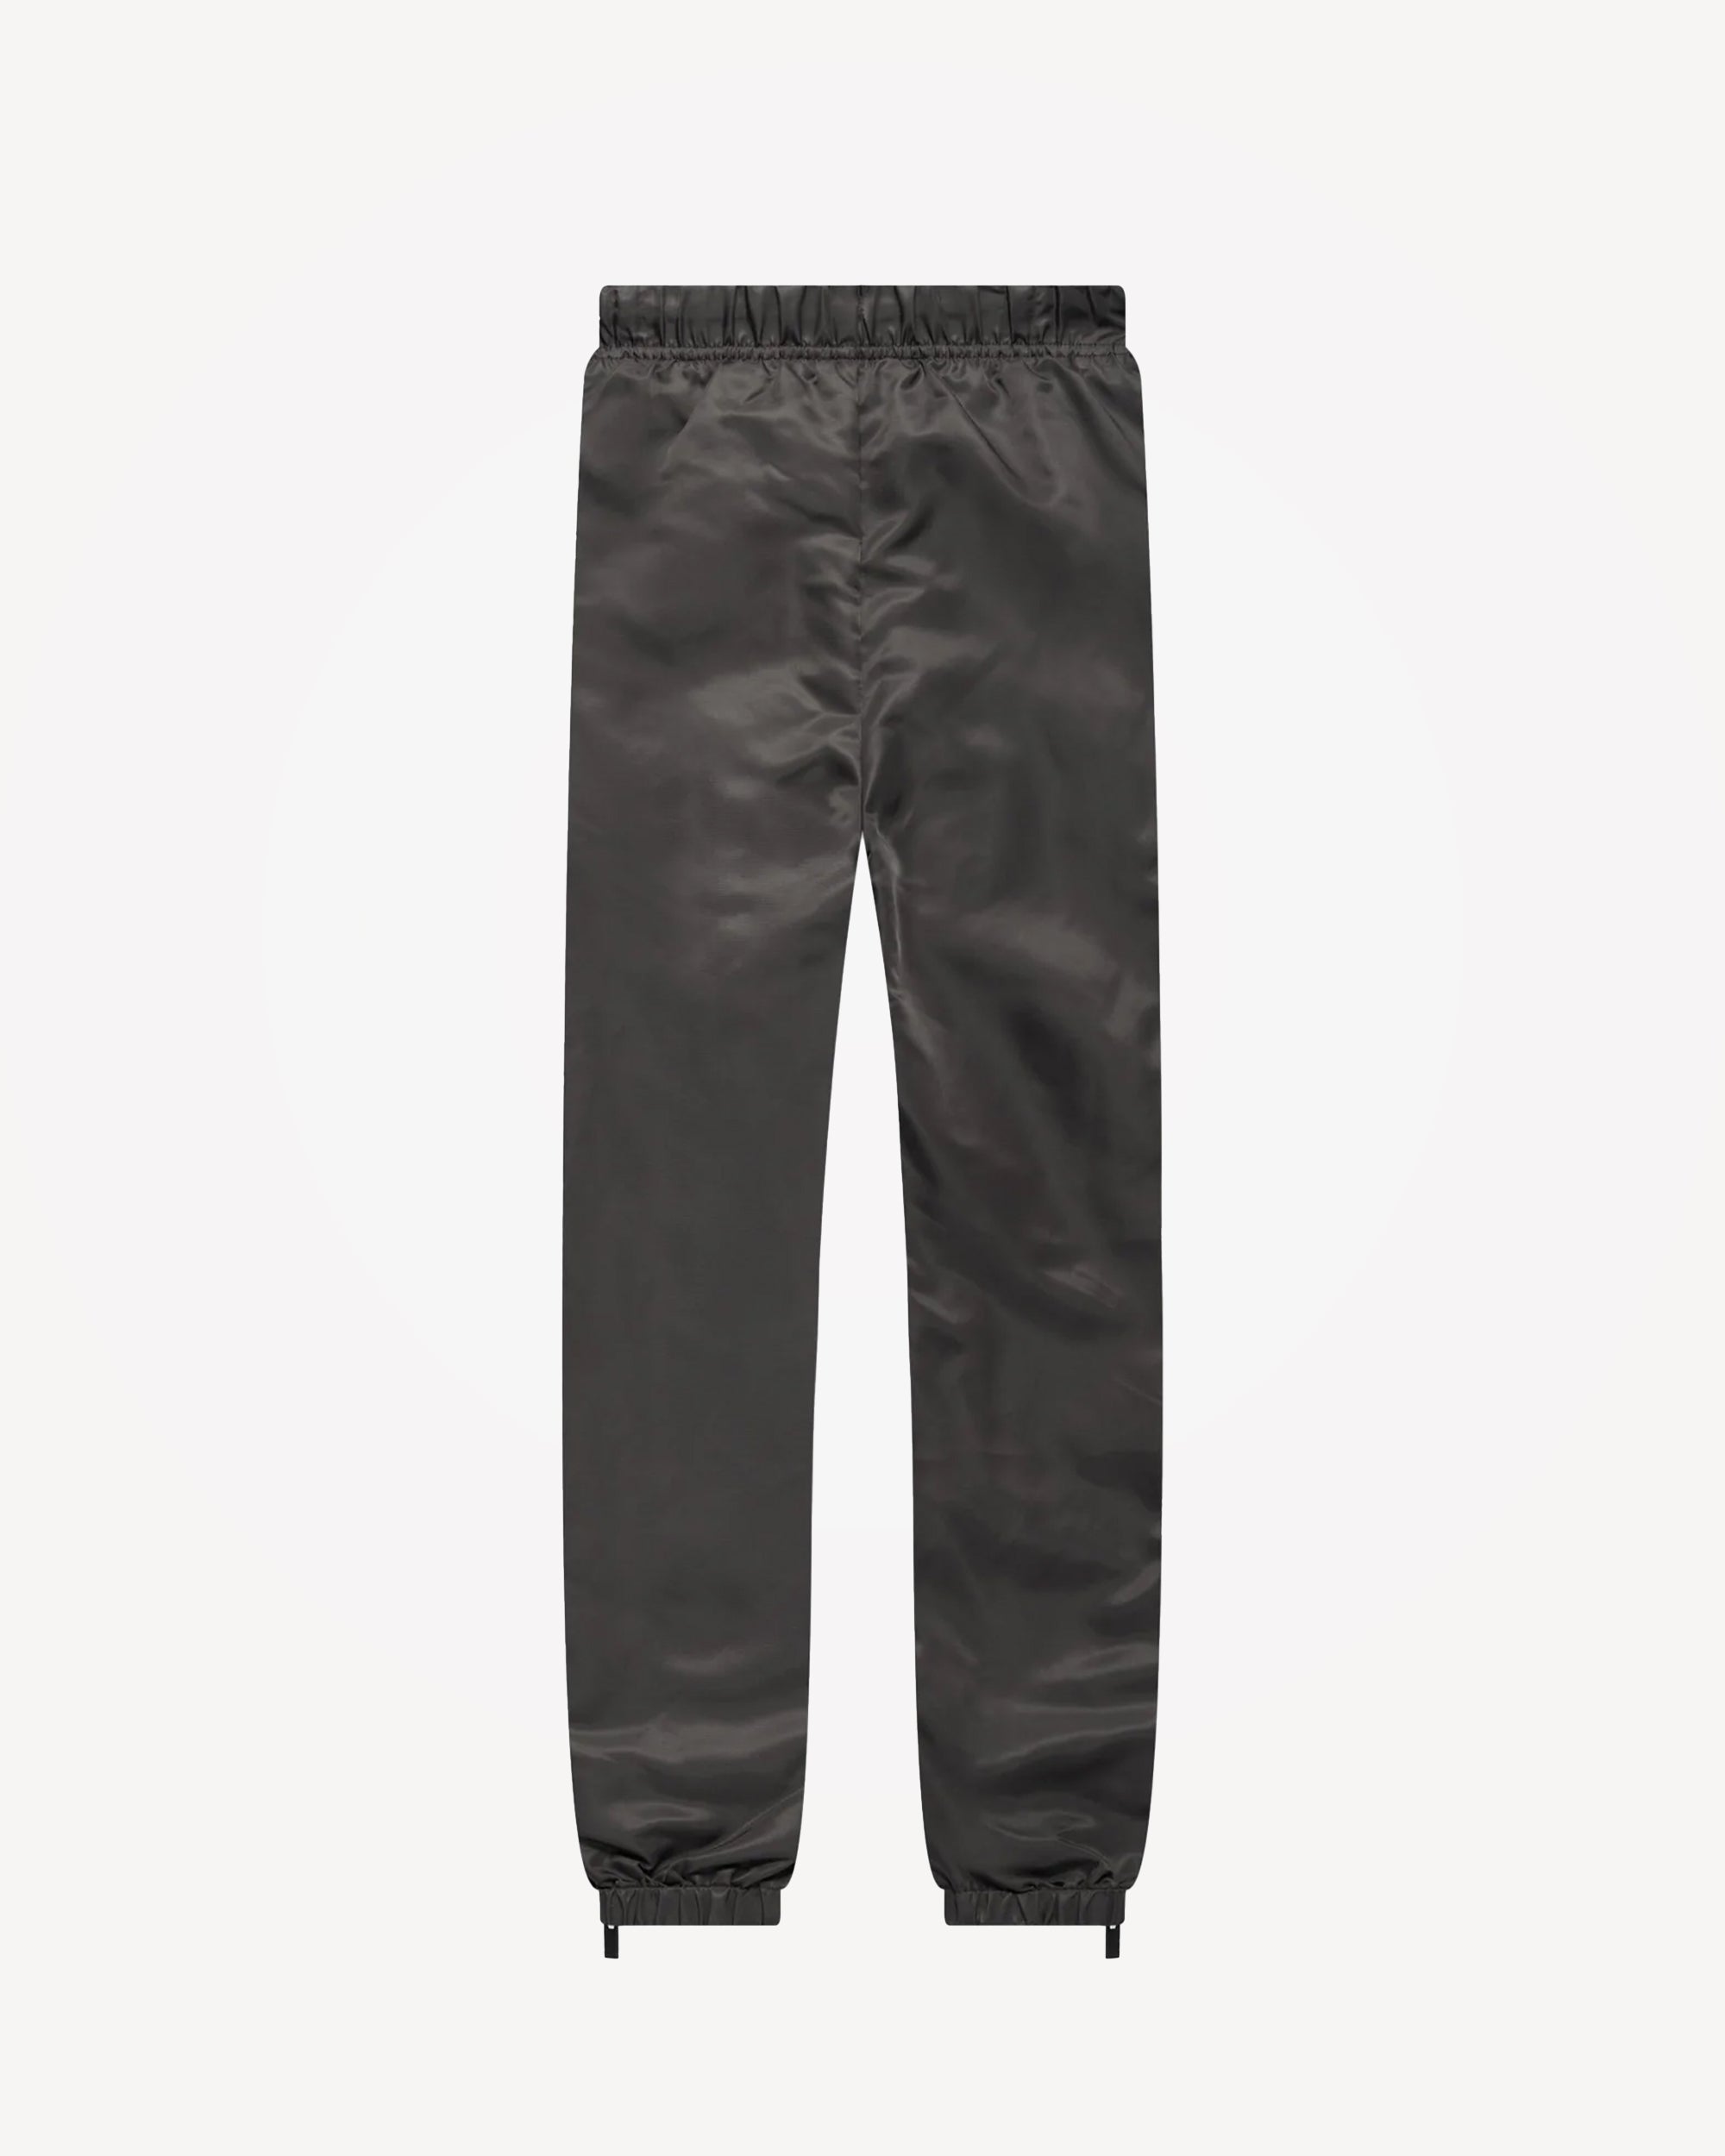 Kids' Track Pant in Iron